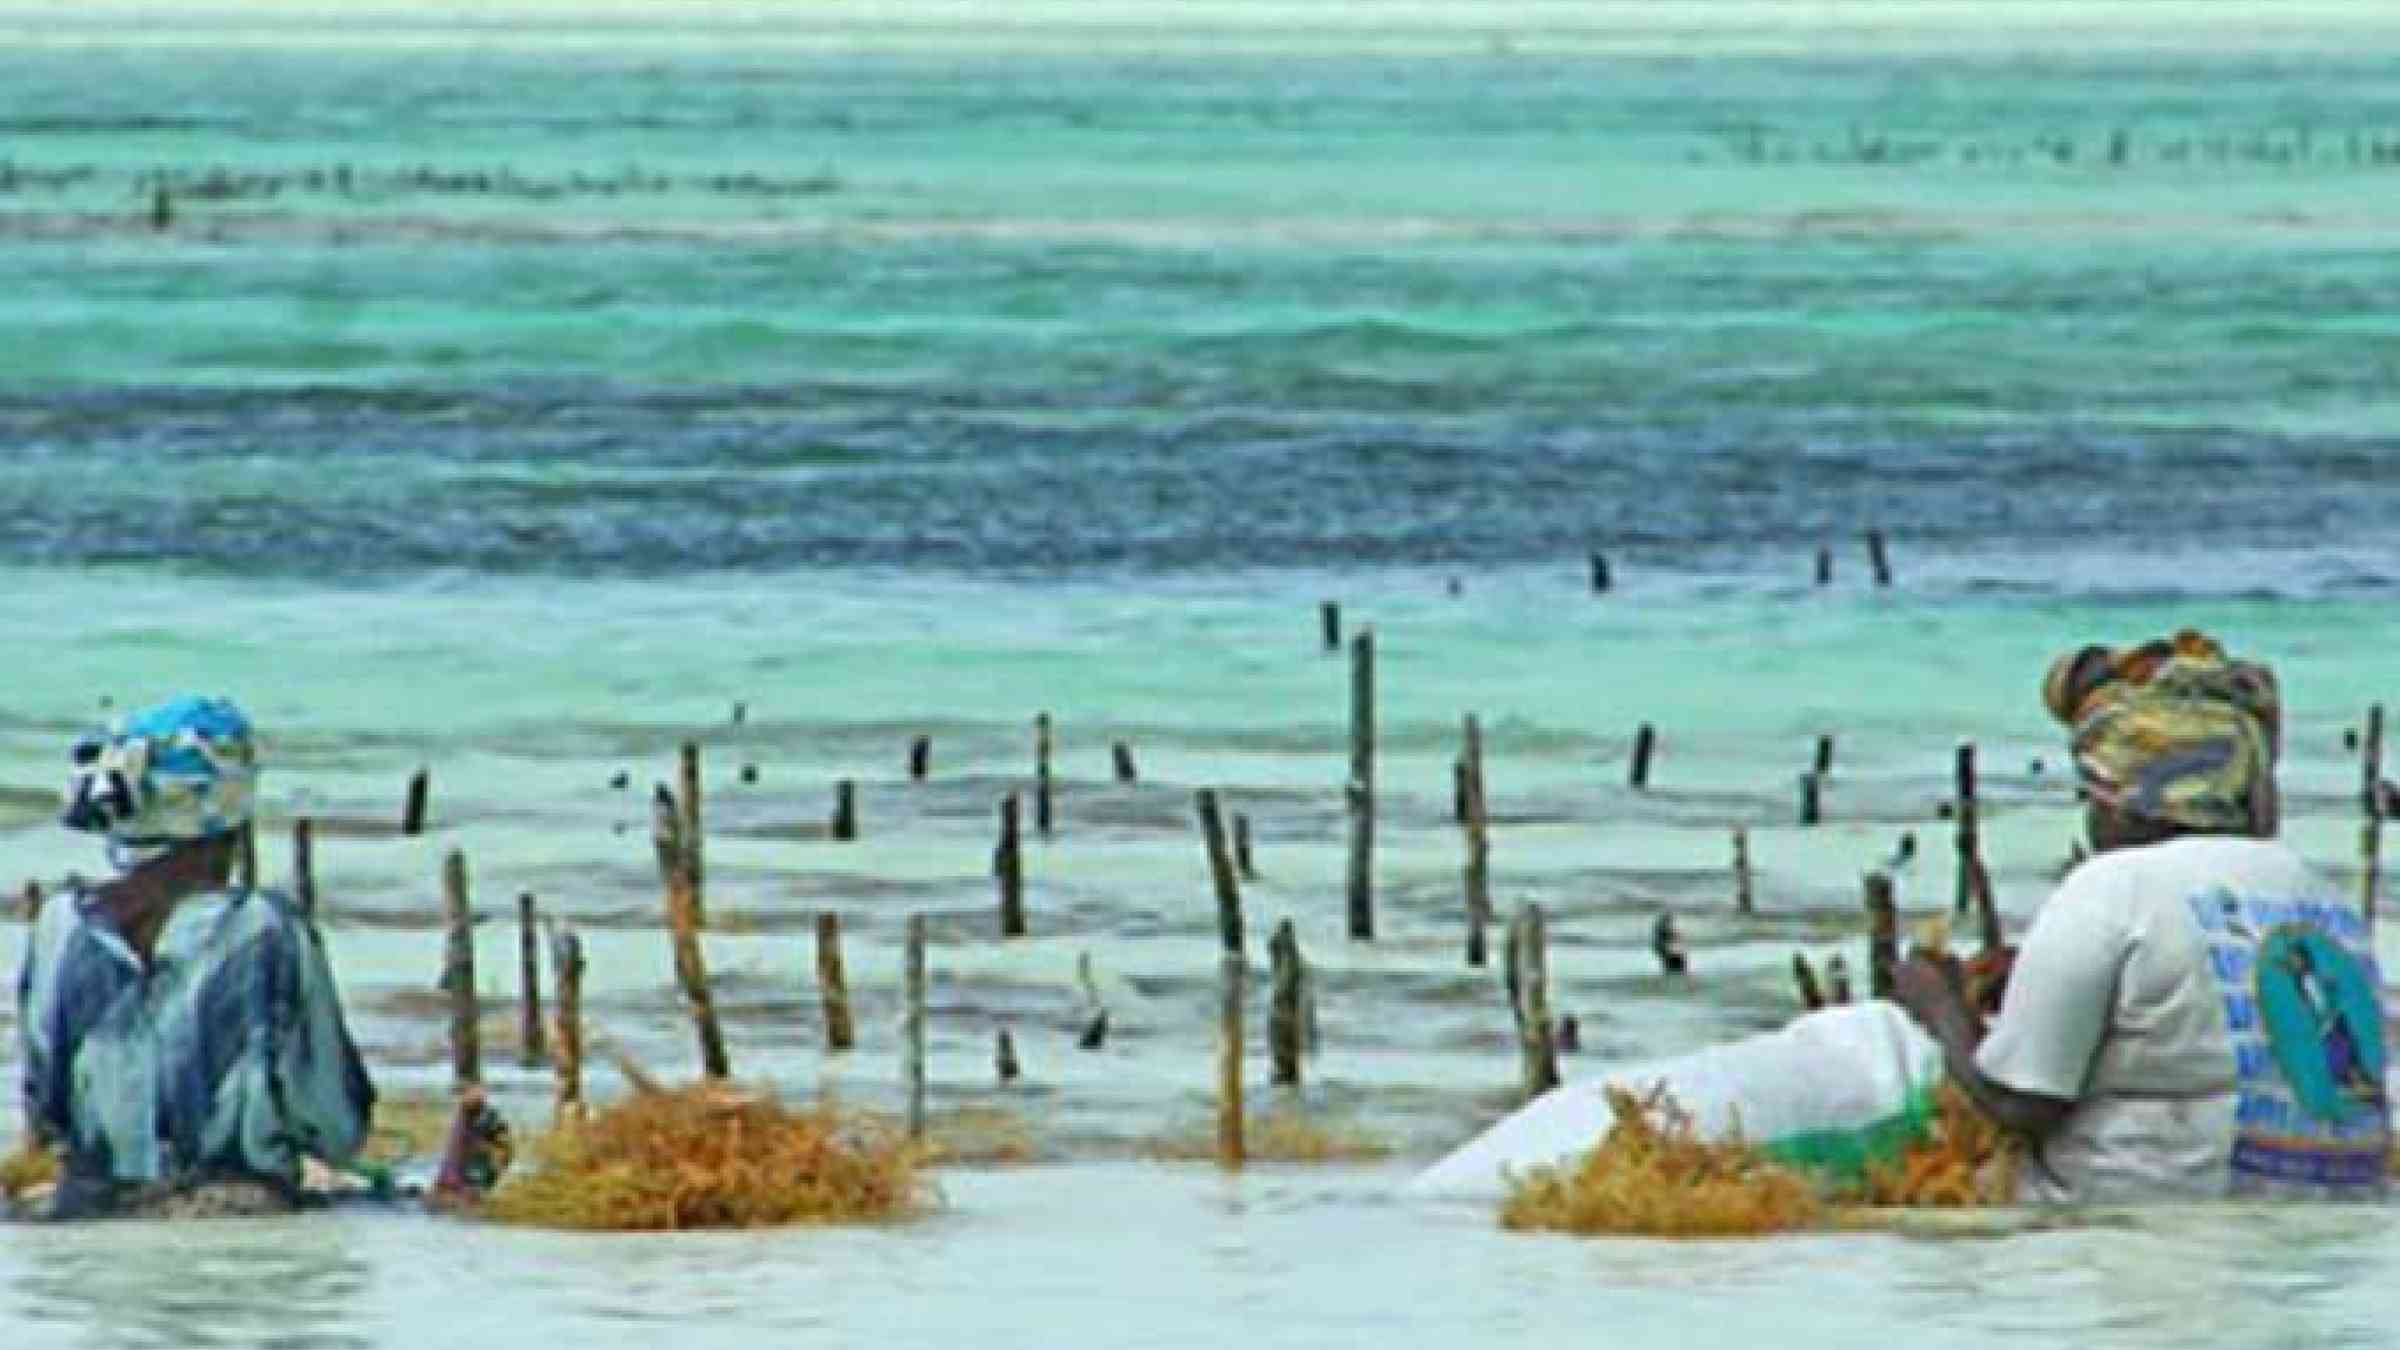 Harvesting seaweed. IIED and partners working with local producer cooperatives such as seaweed farms in Zanzibar featured in the institute's 2020 annual review (Photo: imke.sta via Flickr, CC BY-SA 2.0)